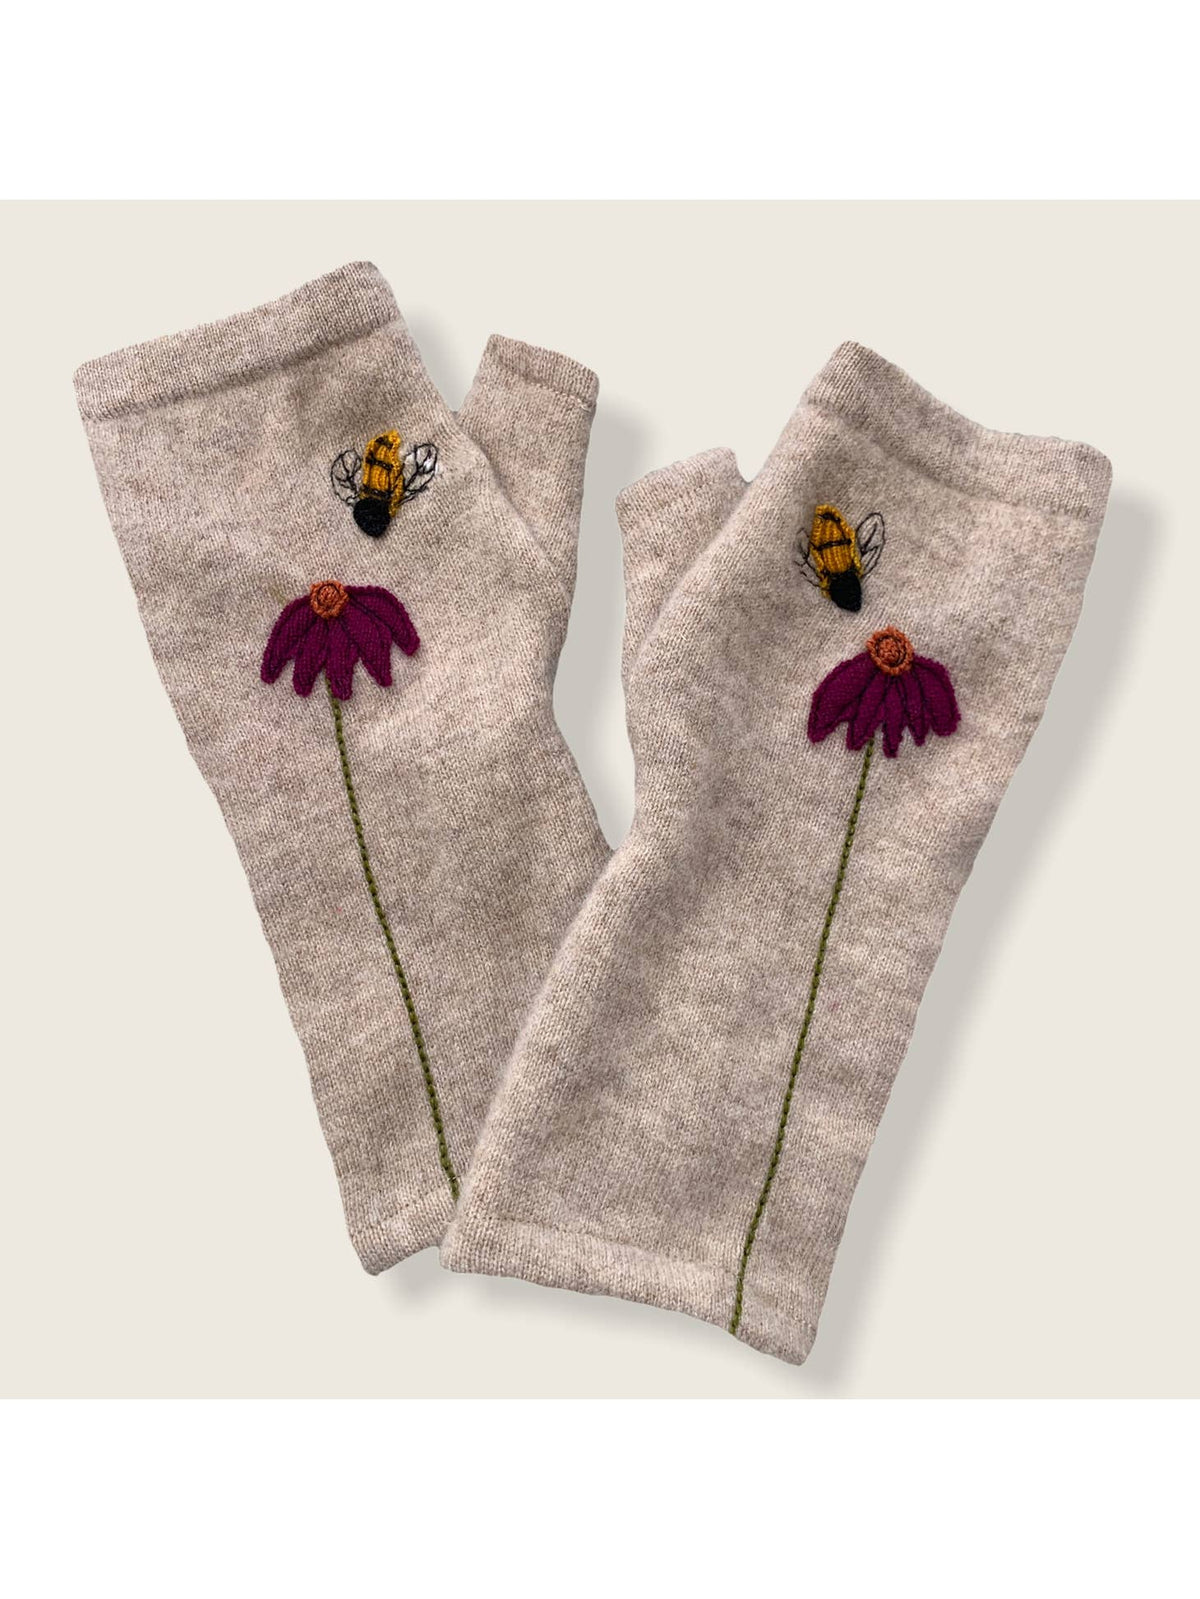 Fingerless Cashmere Gloves :: Bees + Multiple Colors